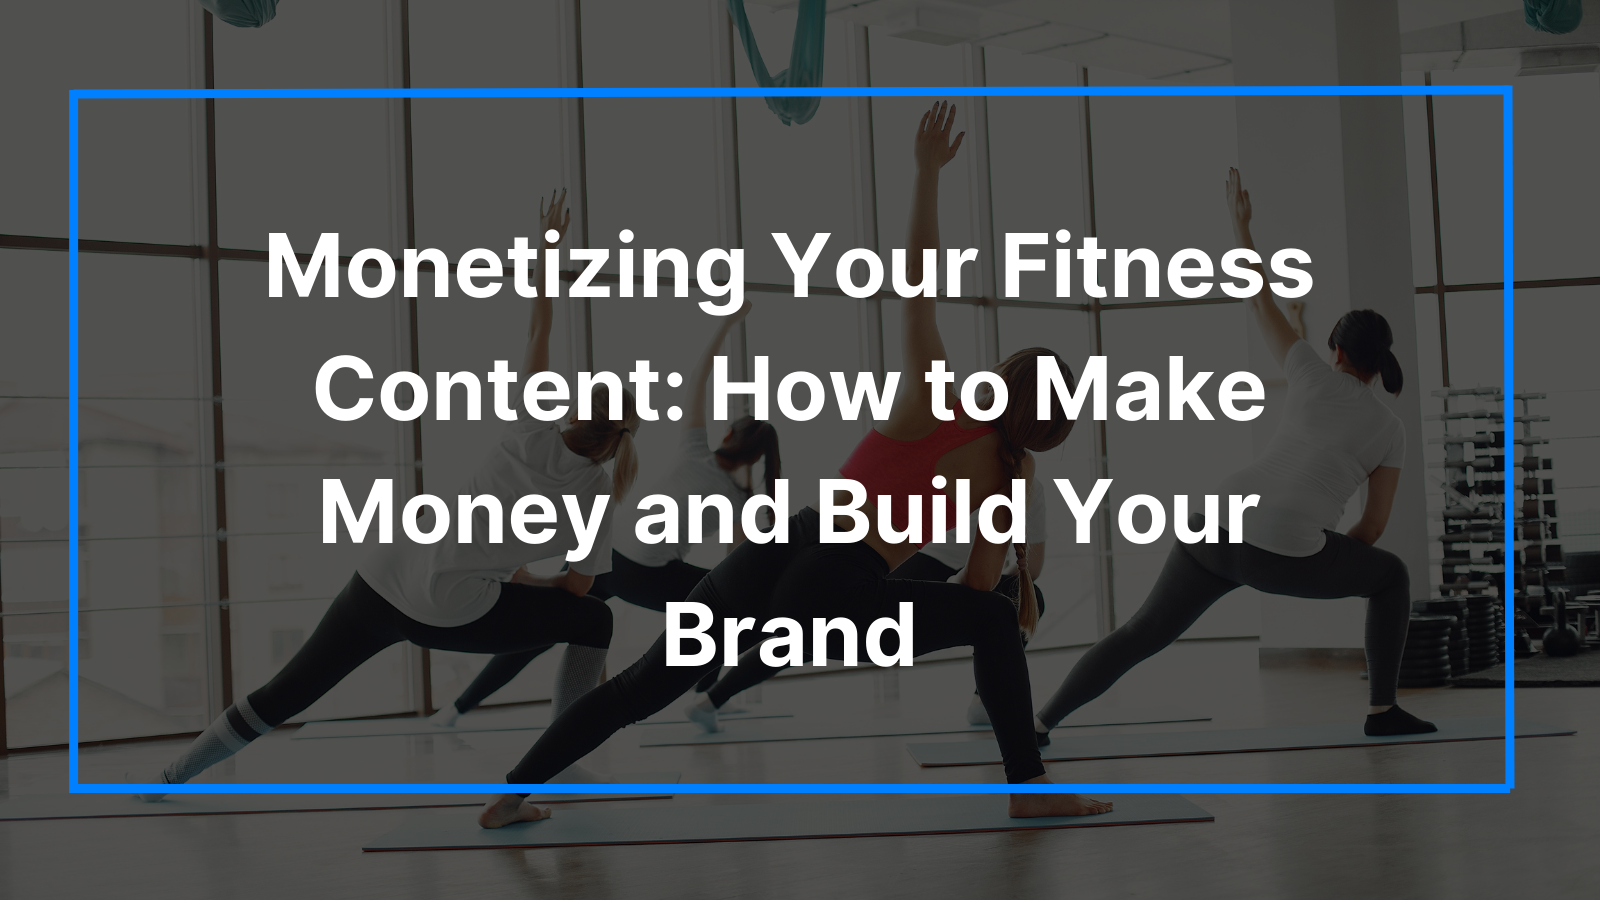 How to Monetize Your Fitness Content: Make Money and Build Your Brand